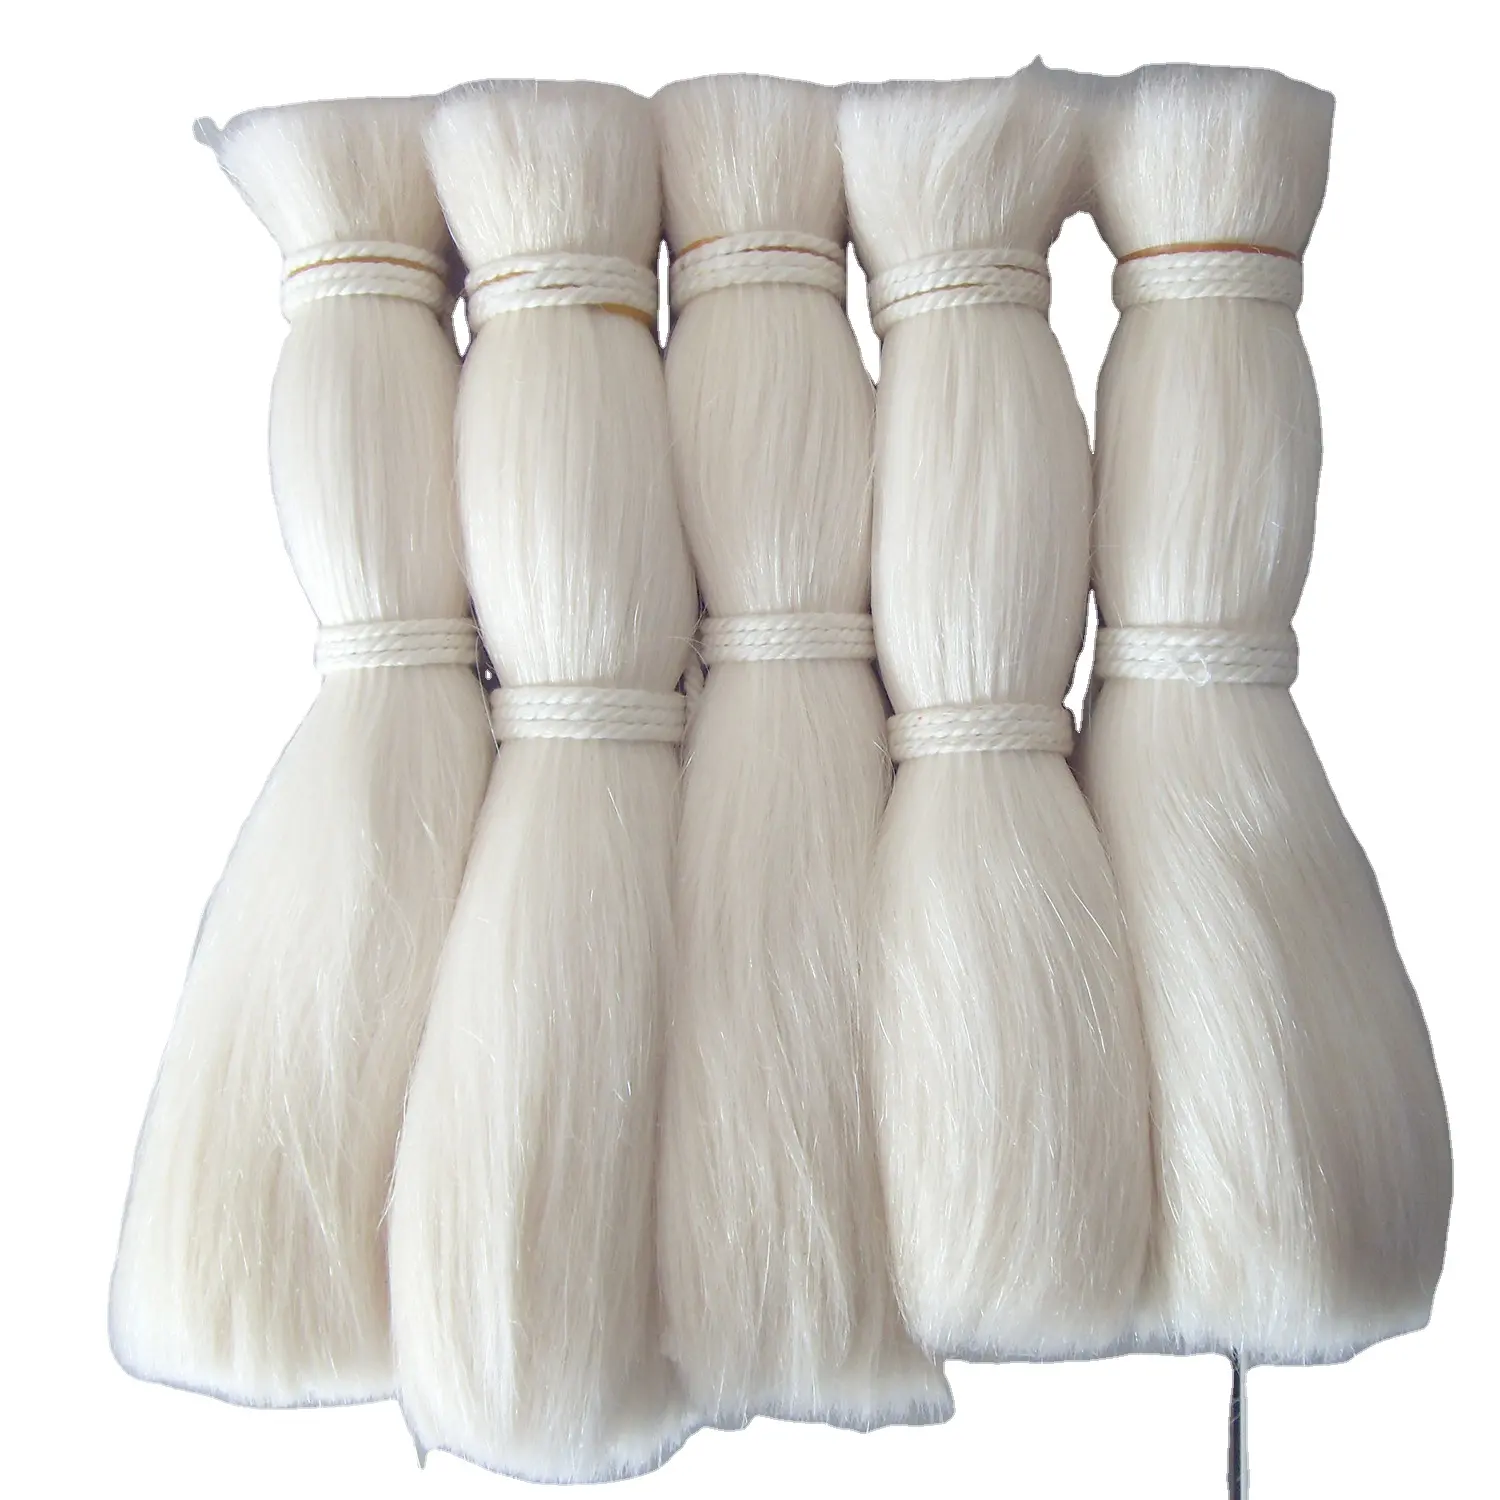 Hot Sale 100% Natural Yak Hair for Hair Extensions, Wig and Beard Natural White 20-80cm Length